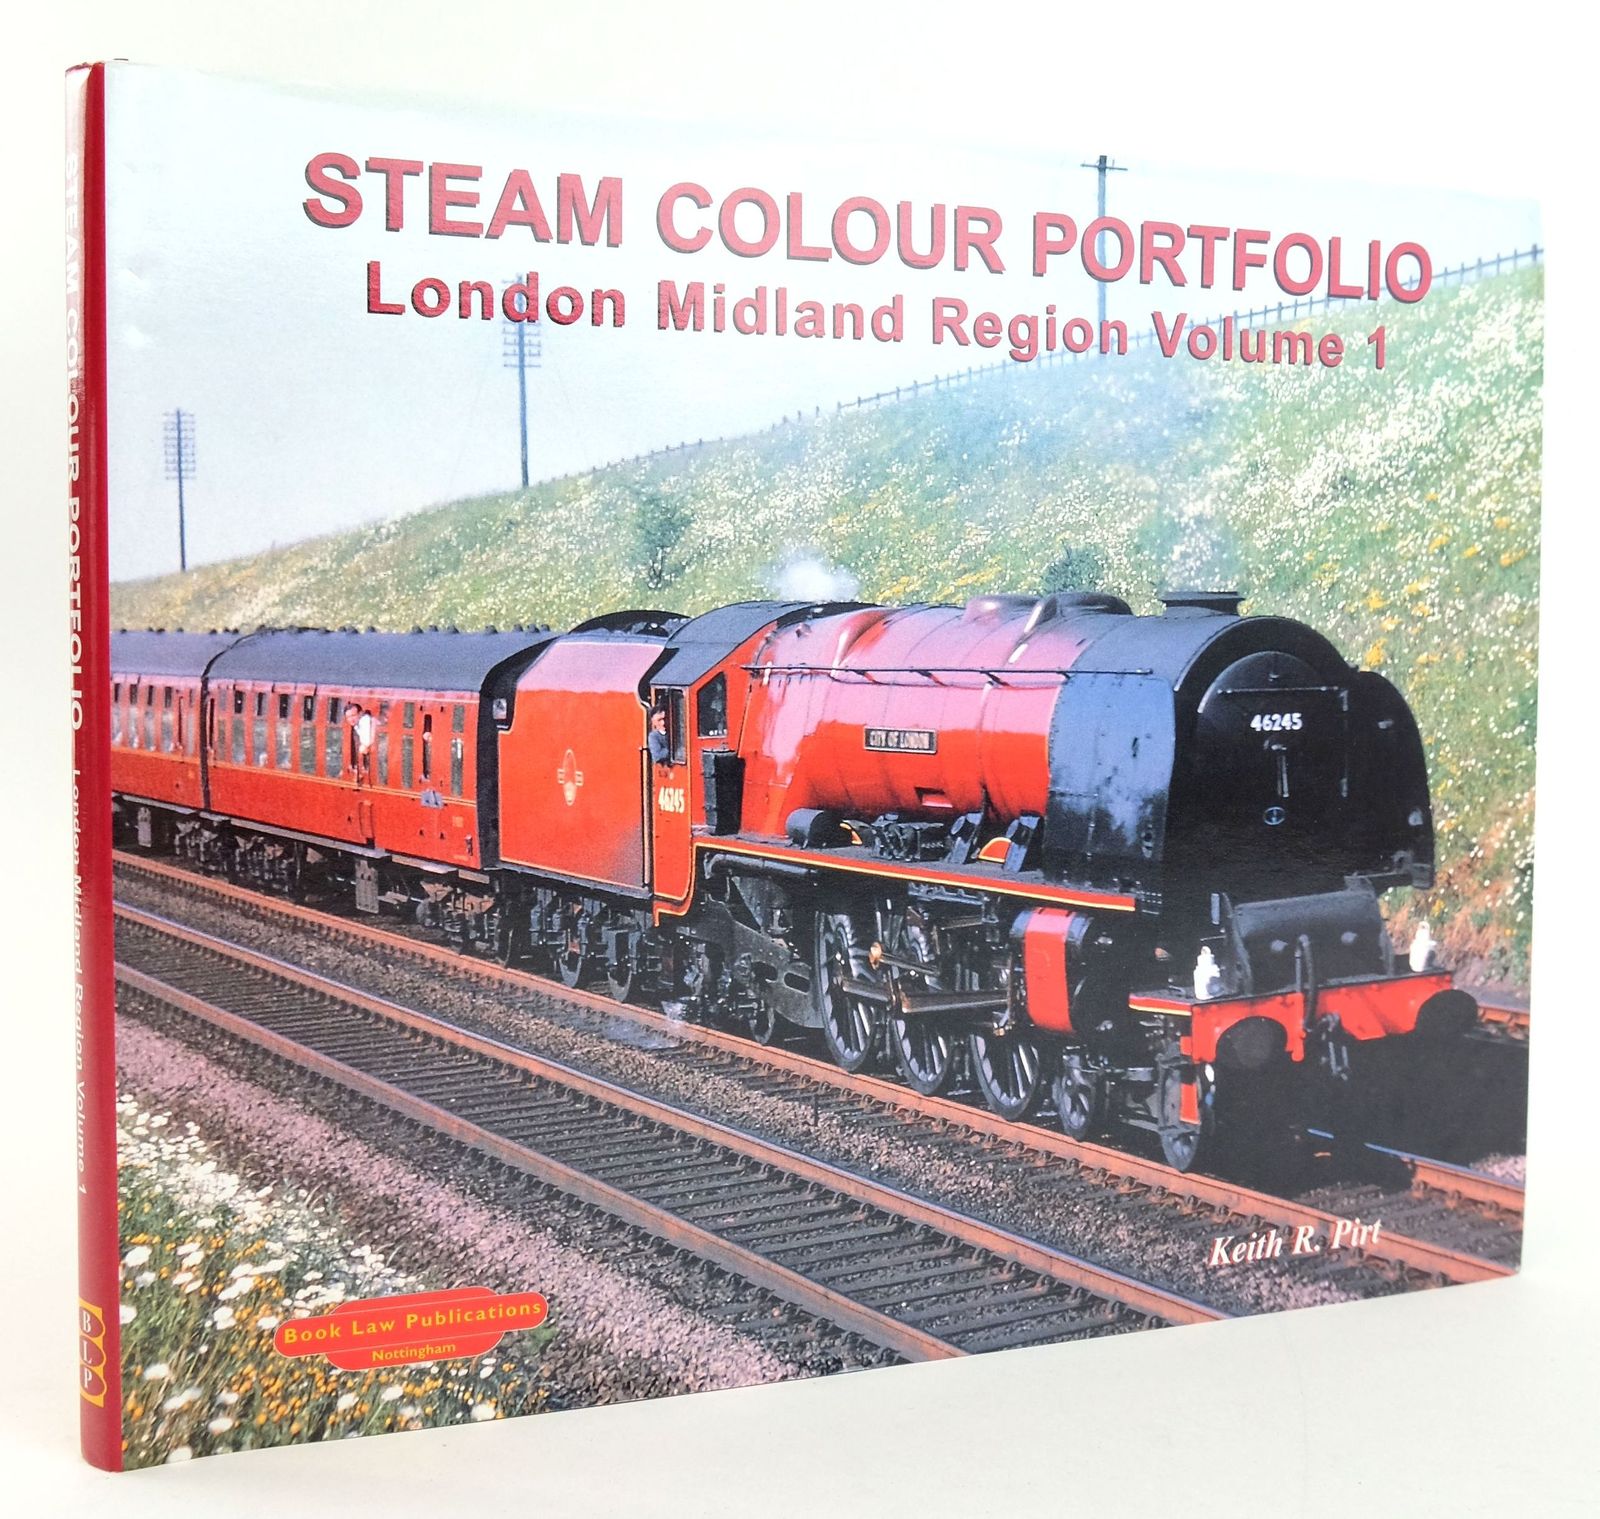 Photo of KEITH PIRT COLOUR PORTFOLIO: LONDON MIDLAND REGION written by Pirt, Keith R. published by Book Law Publications (STOCK CODE: 1820036)  for sale by Stella & Rose's Books